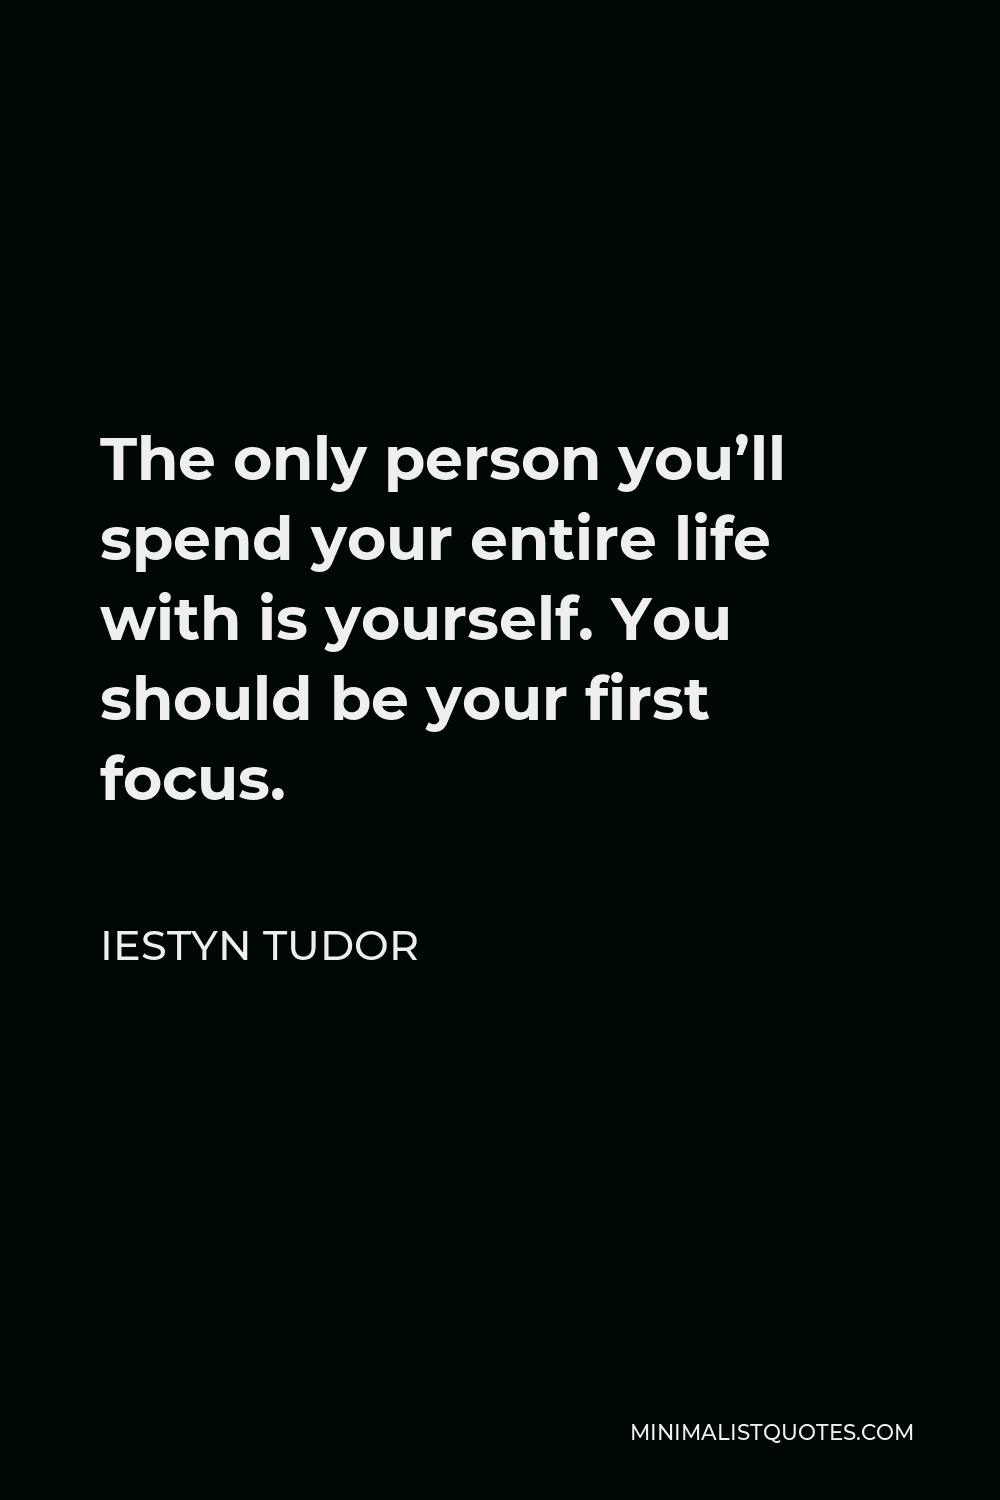 Iestyn Tudor Quote - The only person you’ll spend your entire life with is yourself. You should be your first focus.